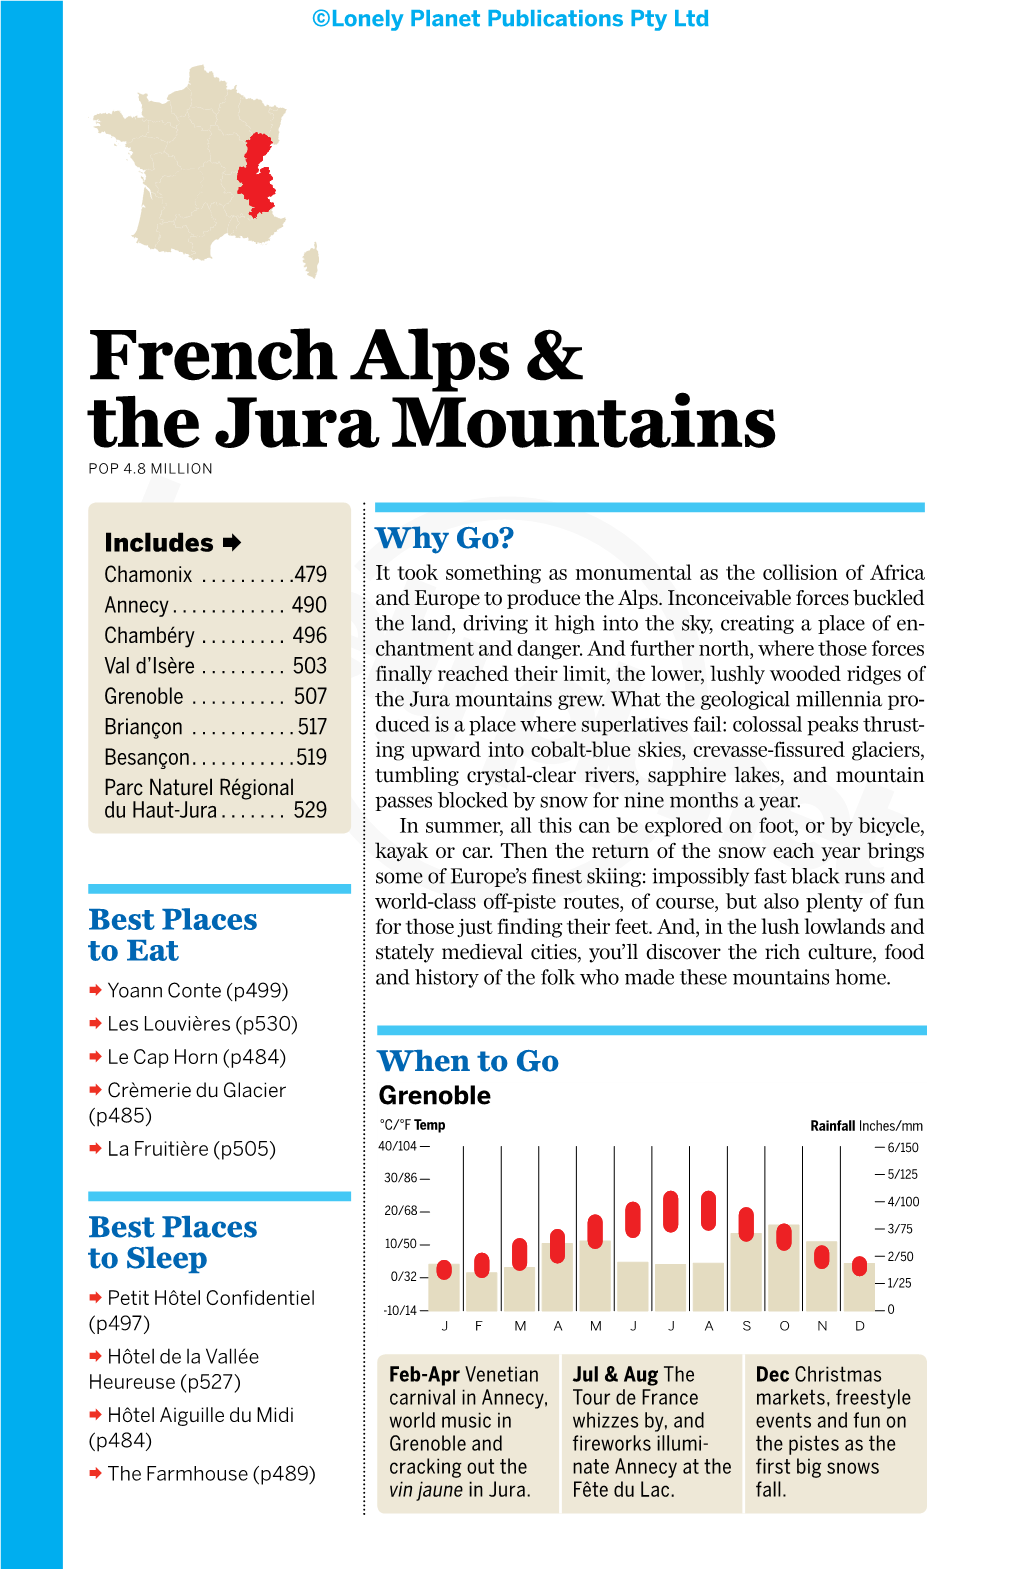 French Alps & the Jura Mountains